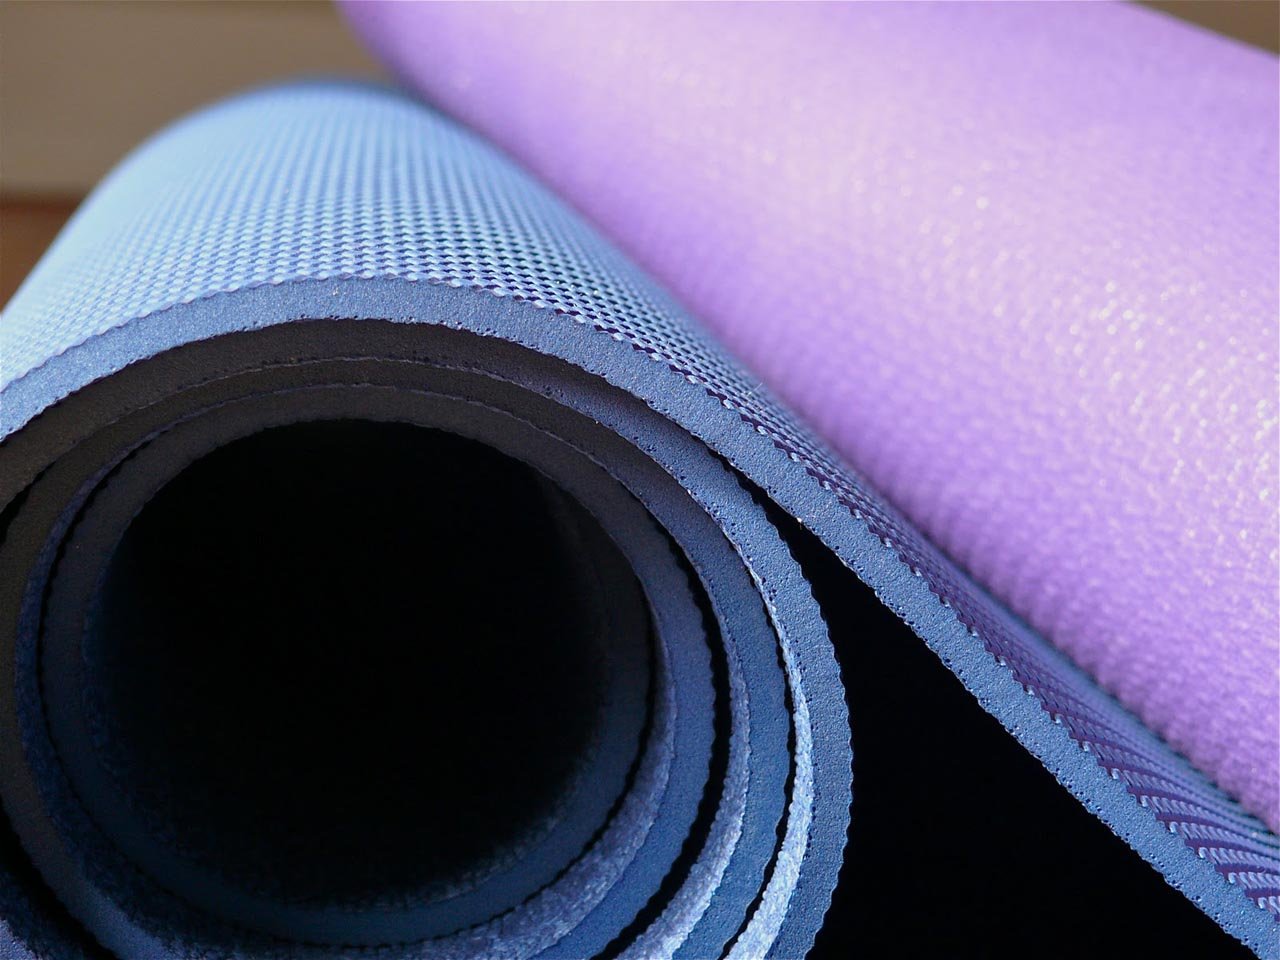 Donate new or gently used yoga mats and props